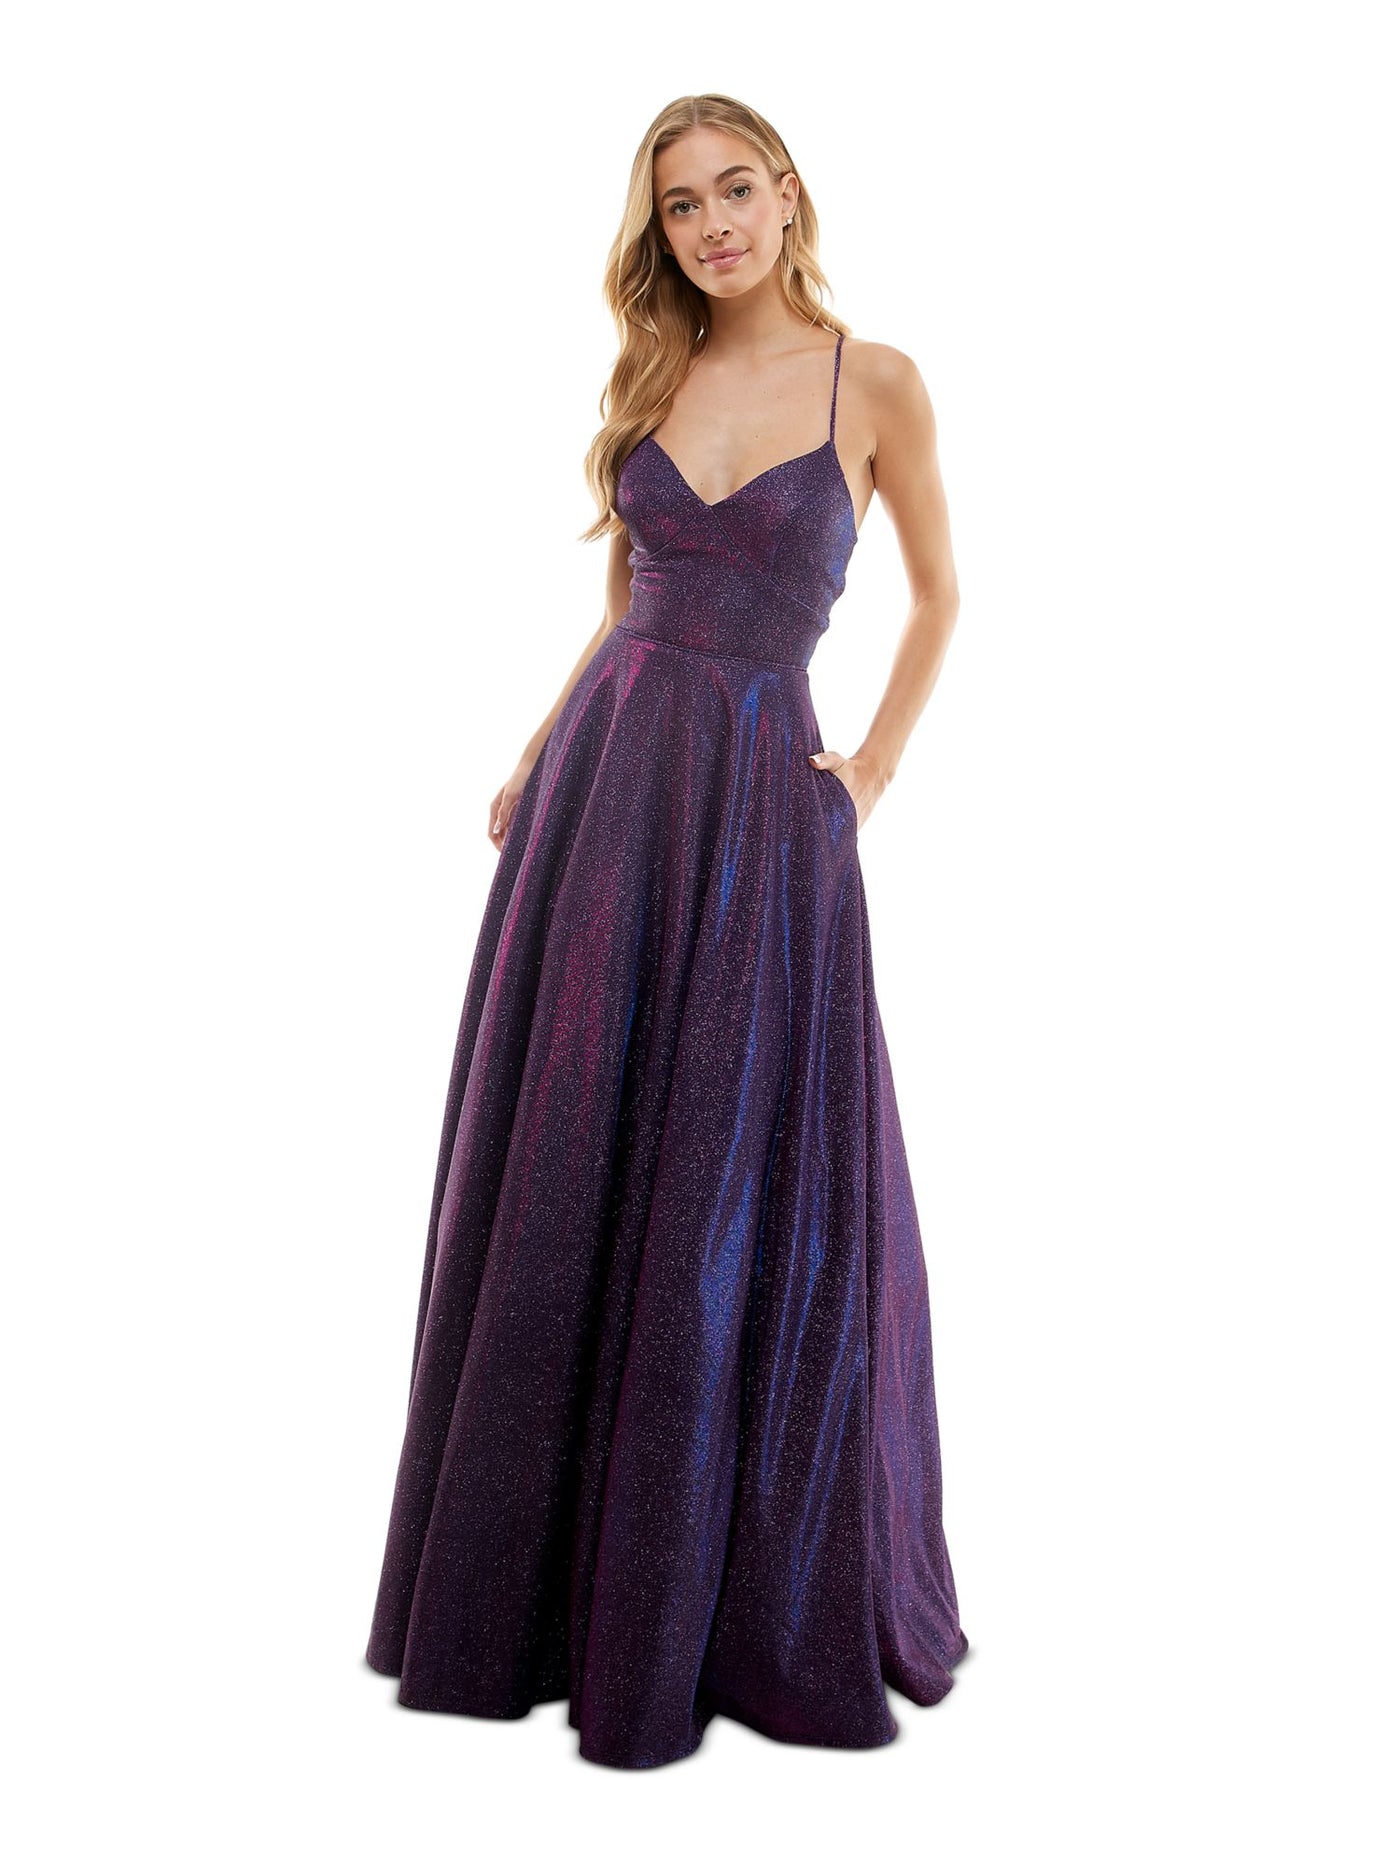 CITY STUDIO Womens Purple Zippered Lace-up Low Back Lined Spaghetti Strap V Neck Full-Length Prom Gown Dress Juniors 7